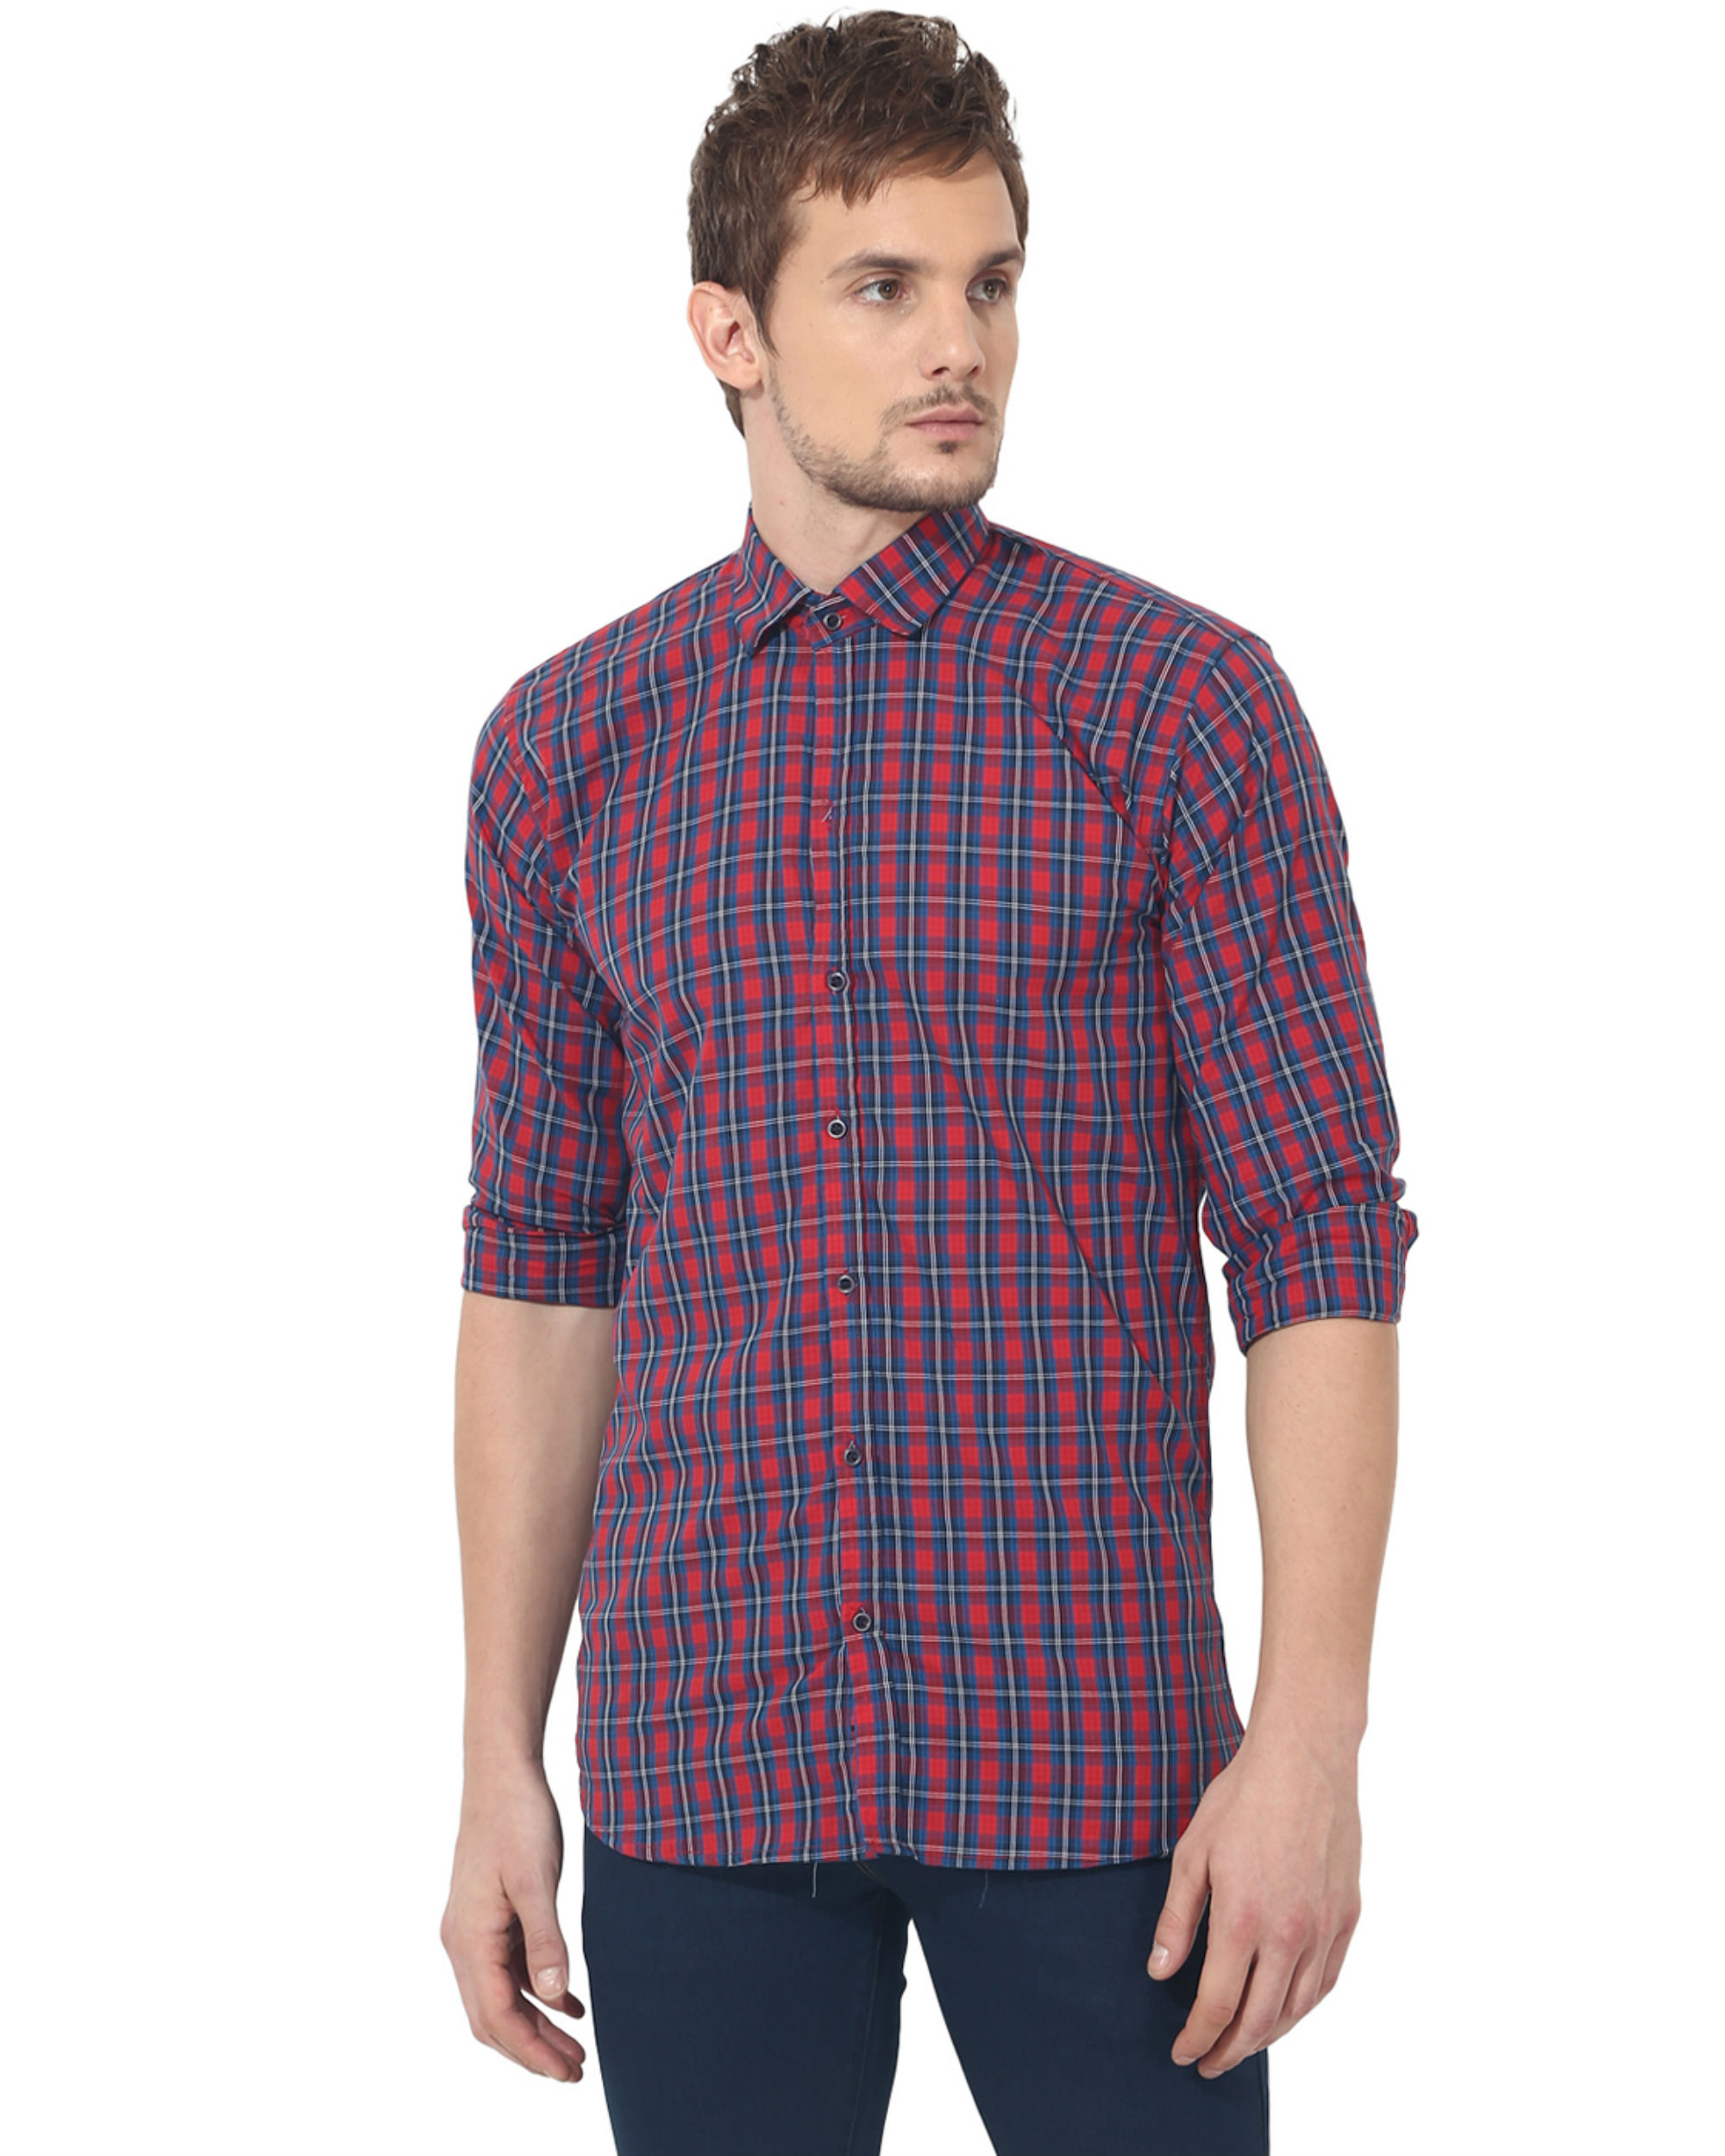 Red & blue checks casual shirt by Green Hill | The Secret Label